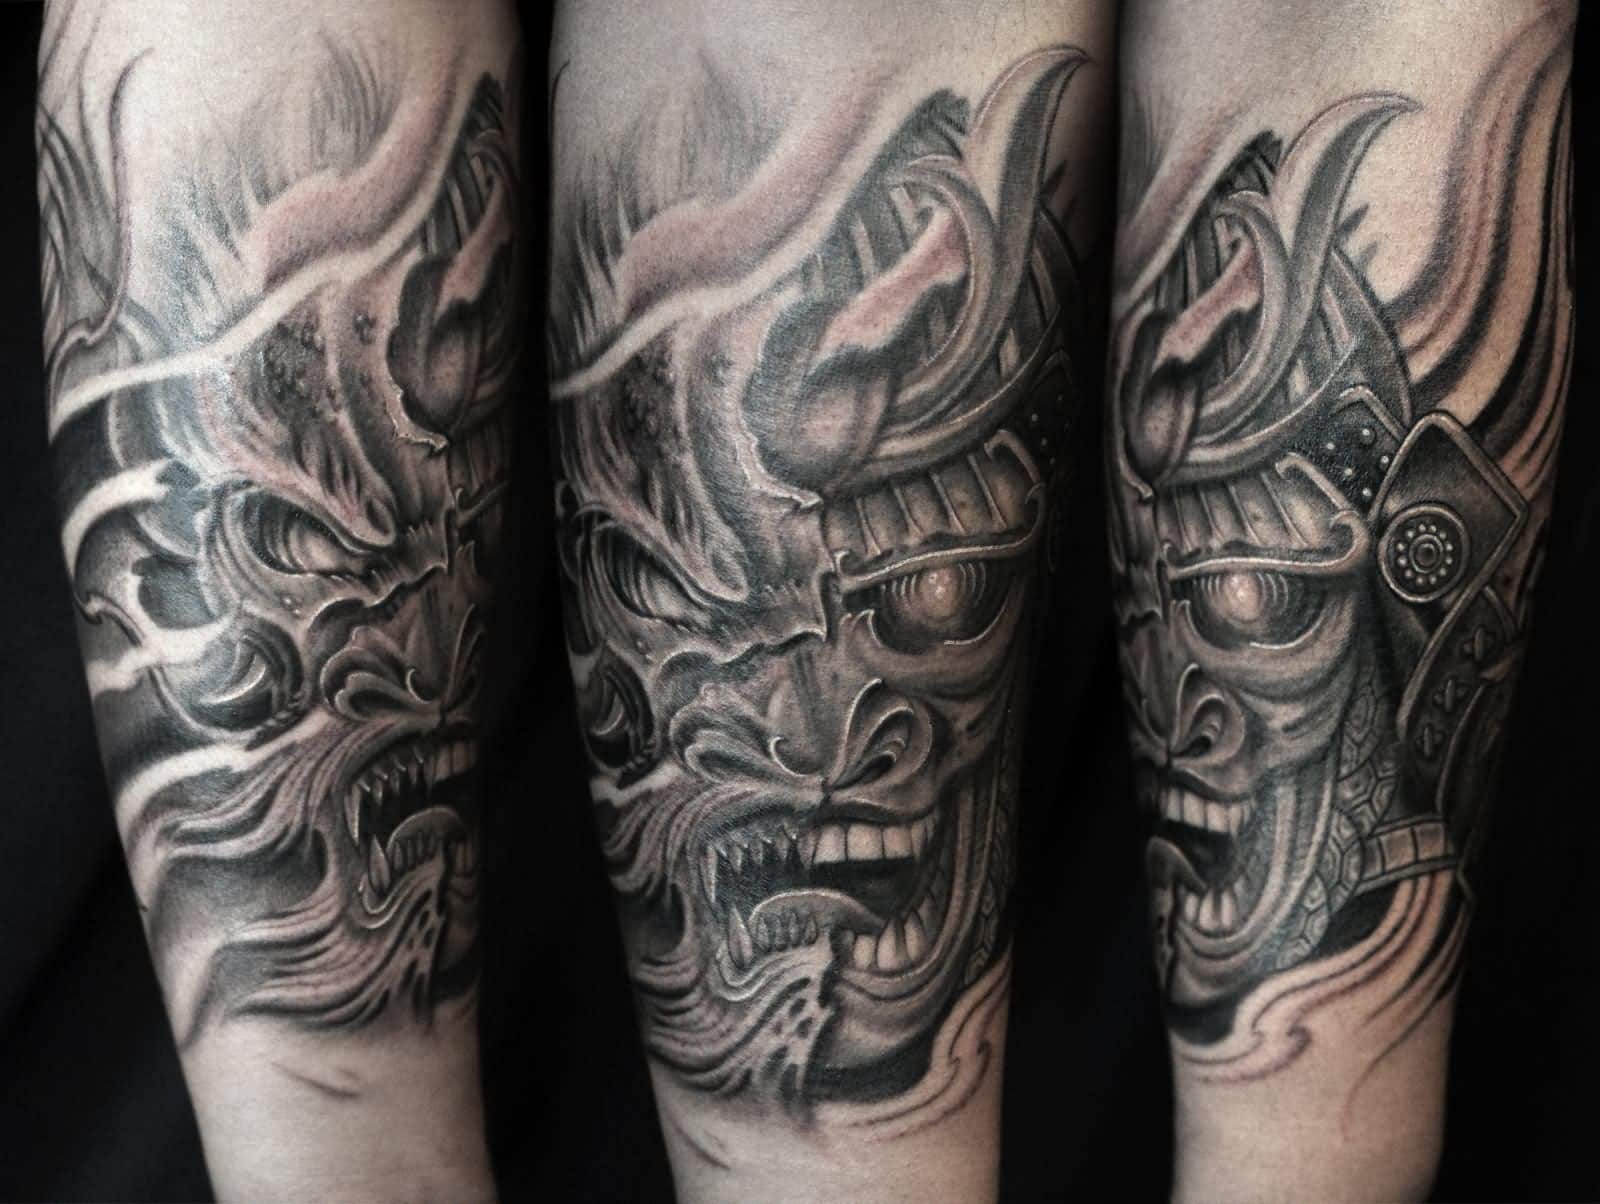 101 Amazing Samurai Mask Tattoo Ideas That Will Blow Your Mind Outsons Men S Fashion Tips And Style Guide For 2020